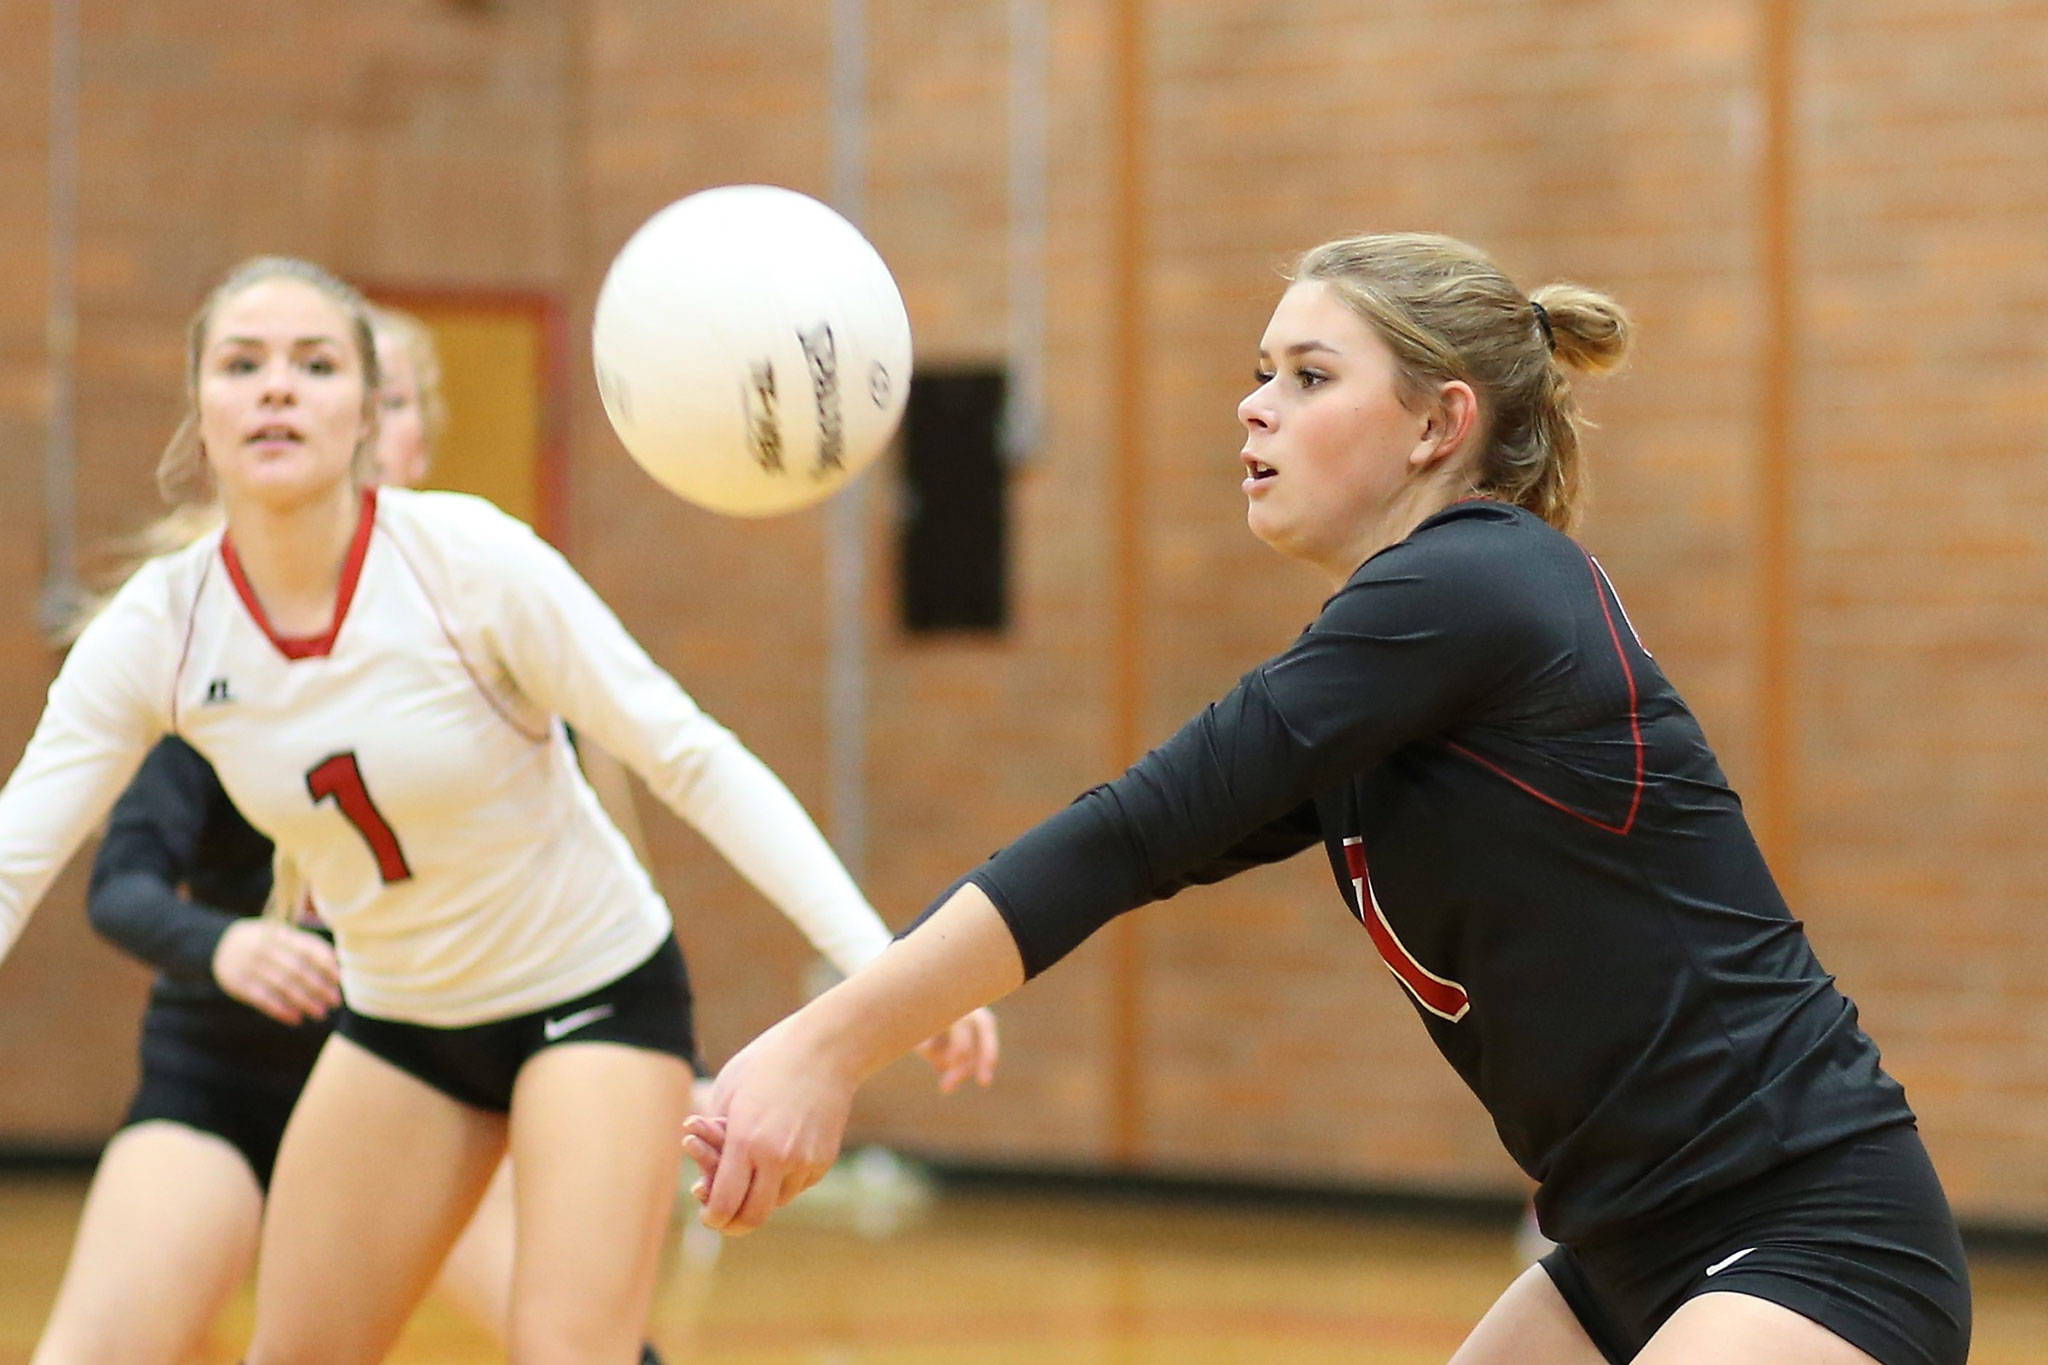 Payton Aparicio, right, Hope Lodell (1), Allison Wenzel (behind Lodell) and the rest of the Coupeville volleyball team play at the district tournament this weekend in hopes a securing a berth in the state tournament. (Photo by John Fisken)